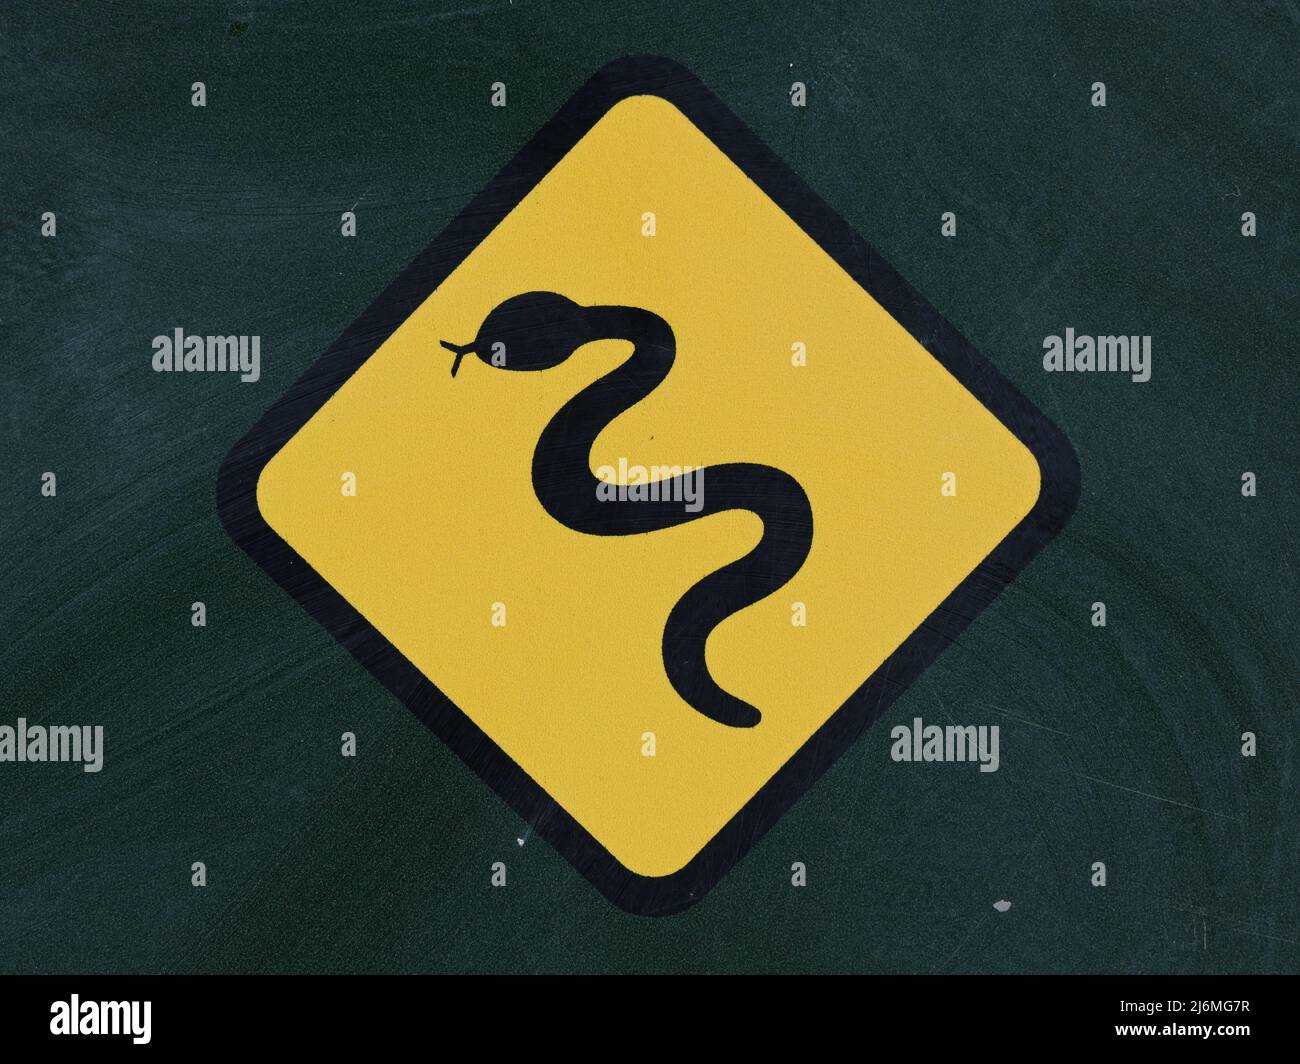 Close up of a black snake icon, in a yellow diamond, on a dark green sign to warn people about the presence of snakes in the area Stock Photo